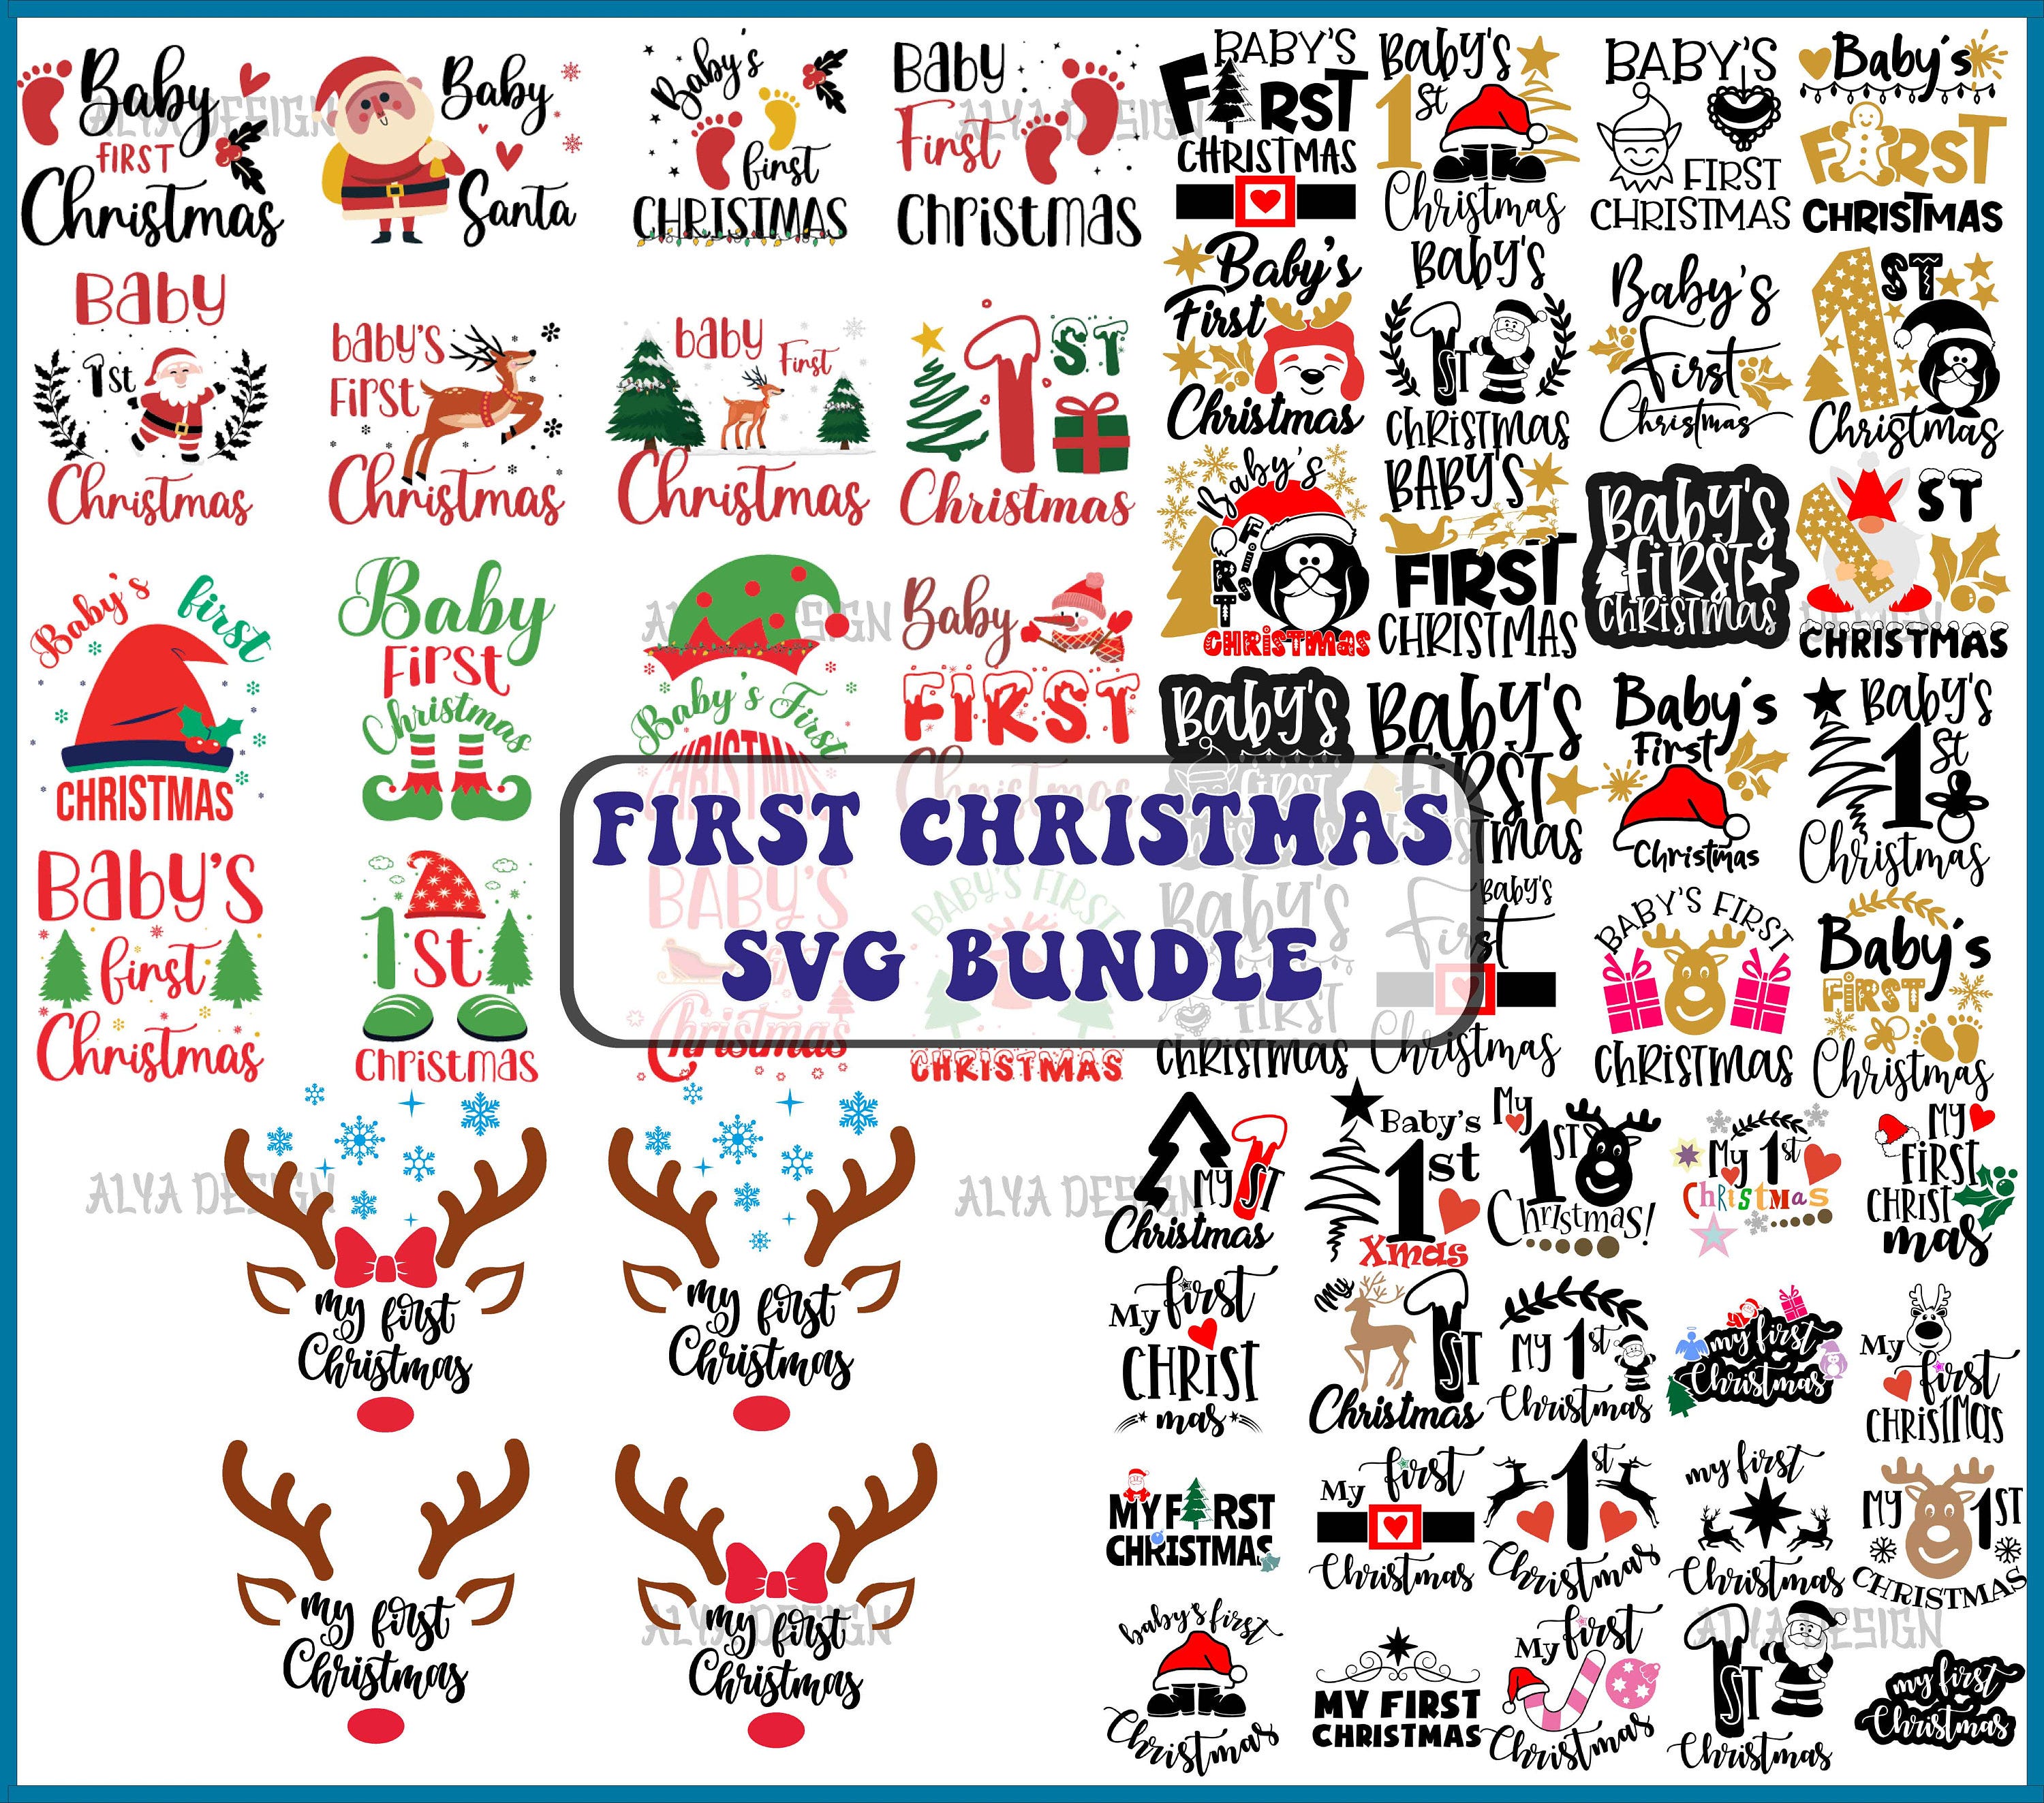 Baby’s first Christmas svg bundle, My first Christmas svg, First Christmas svg, Baby’s first Christmas svg, Christmas svg, Png, Eps, Dxf